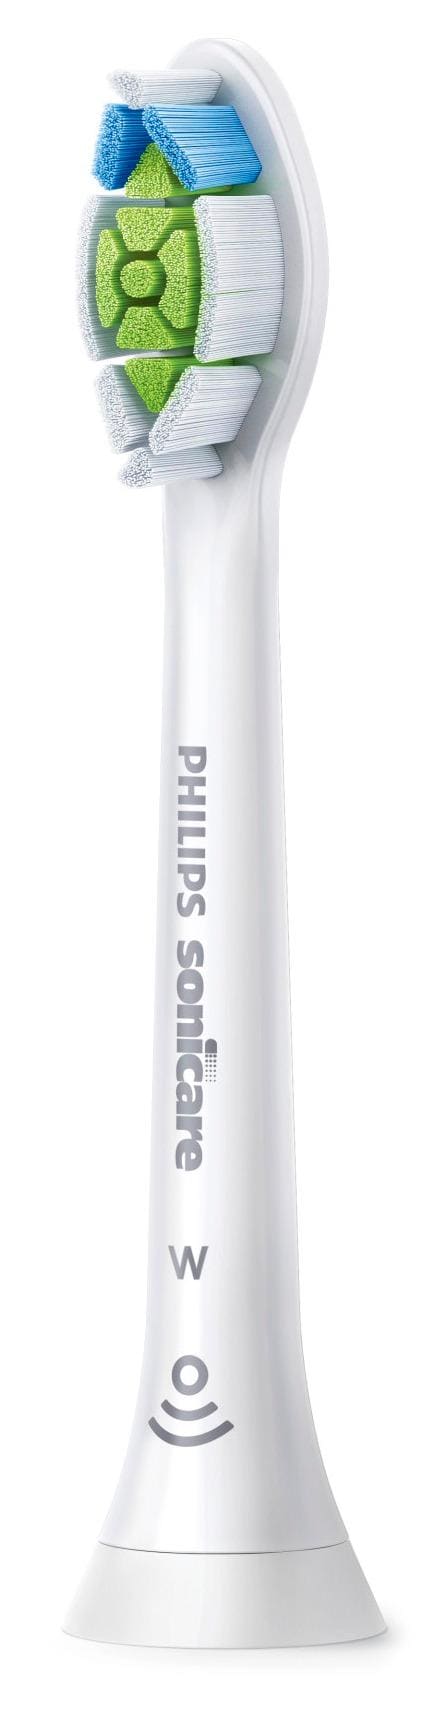 Philips Sonicare - DiamondClean Replacement Toothbrush Heads (4-pack) - White_1